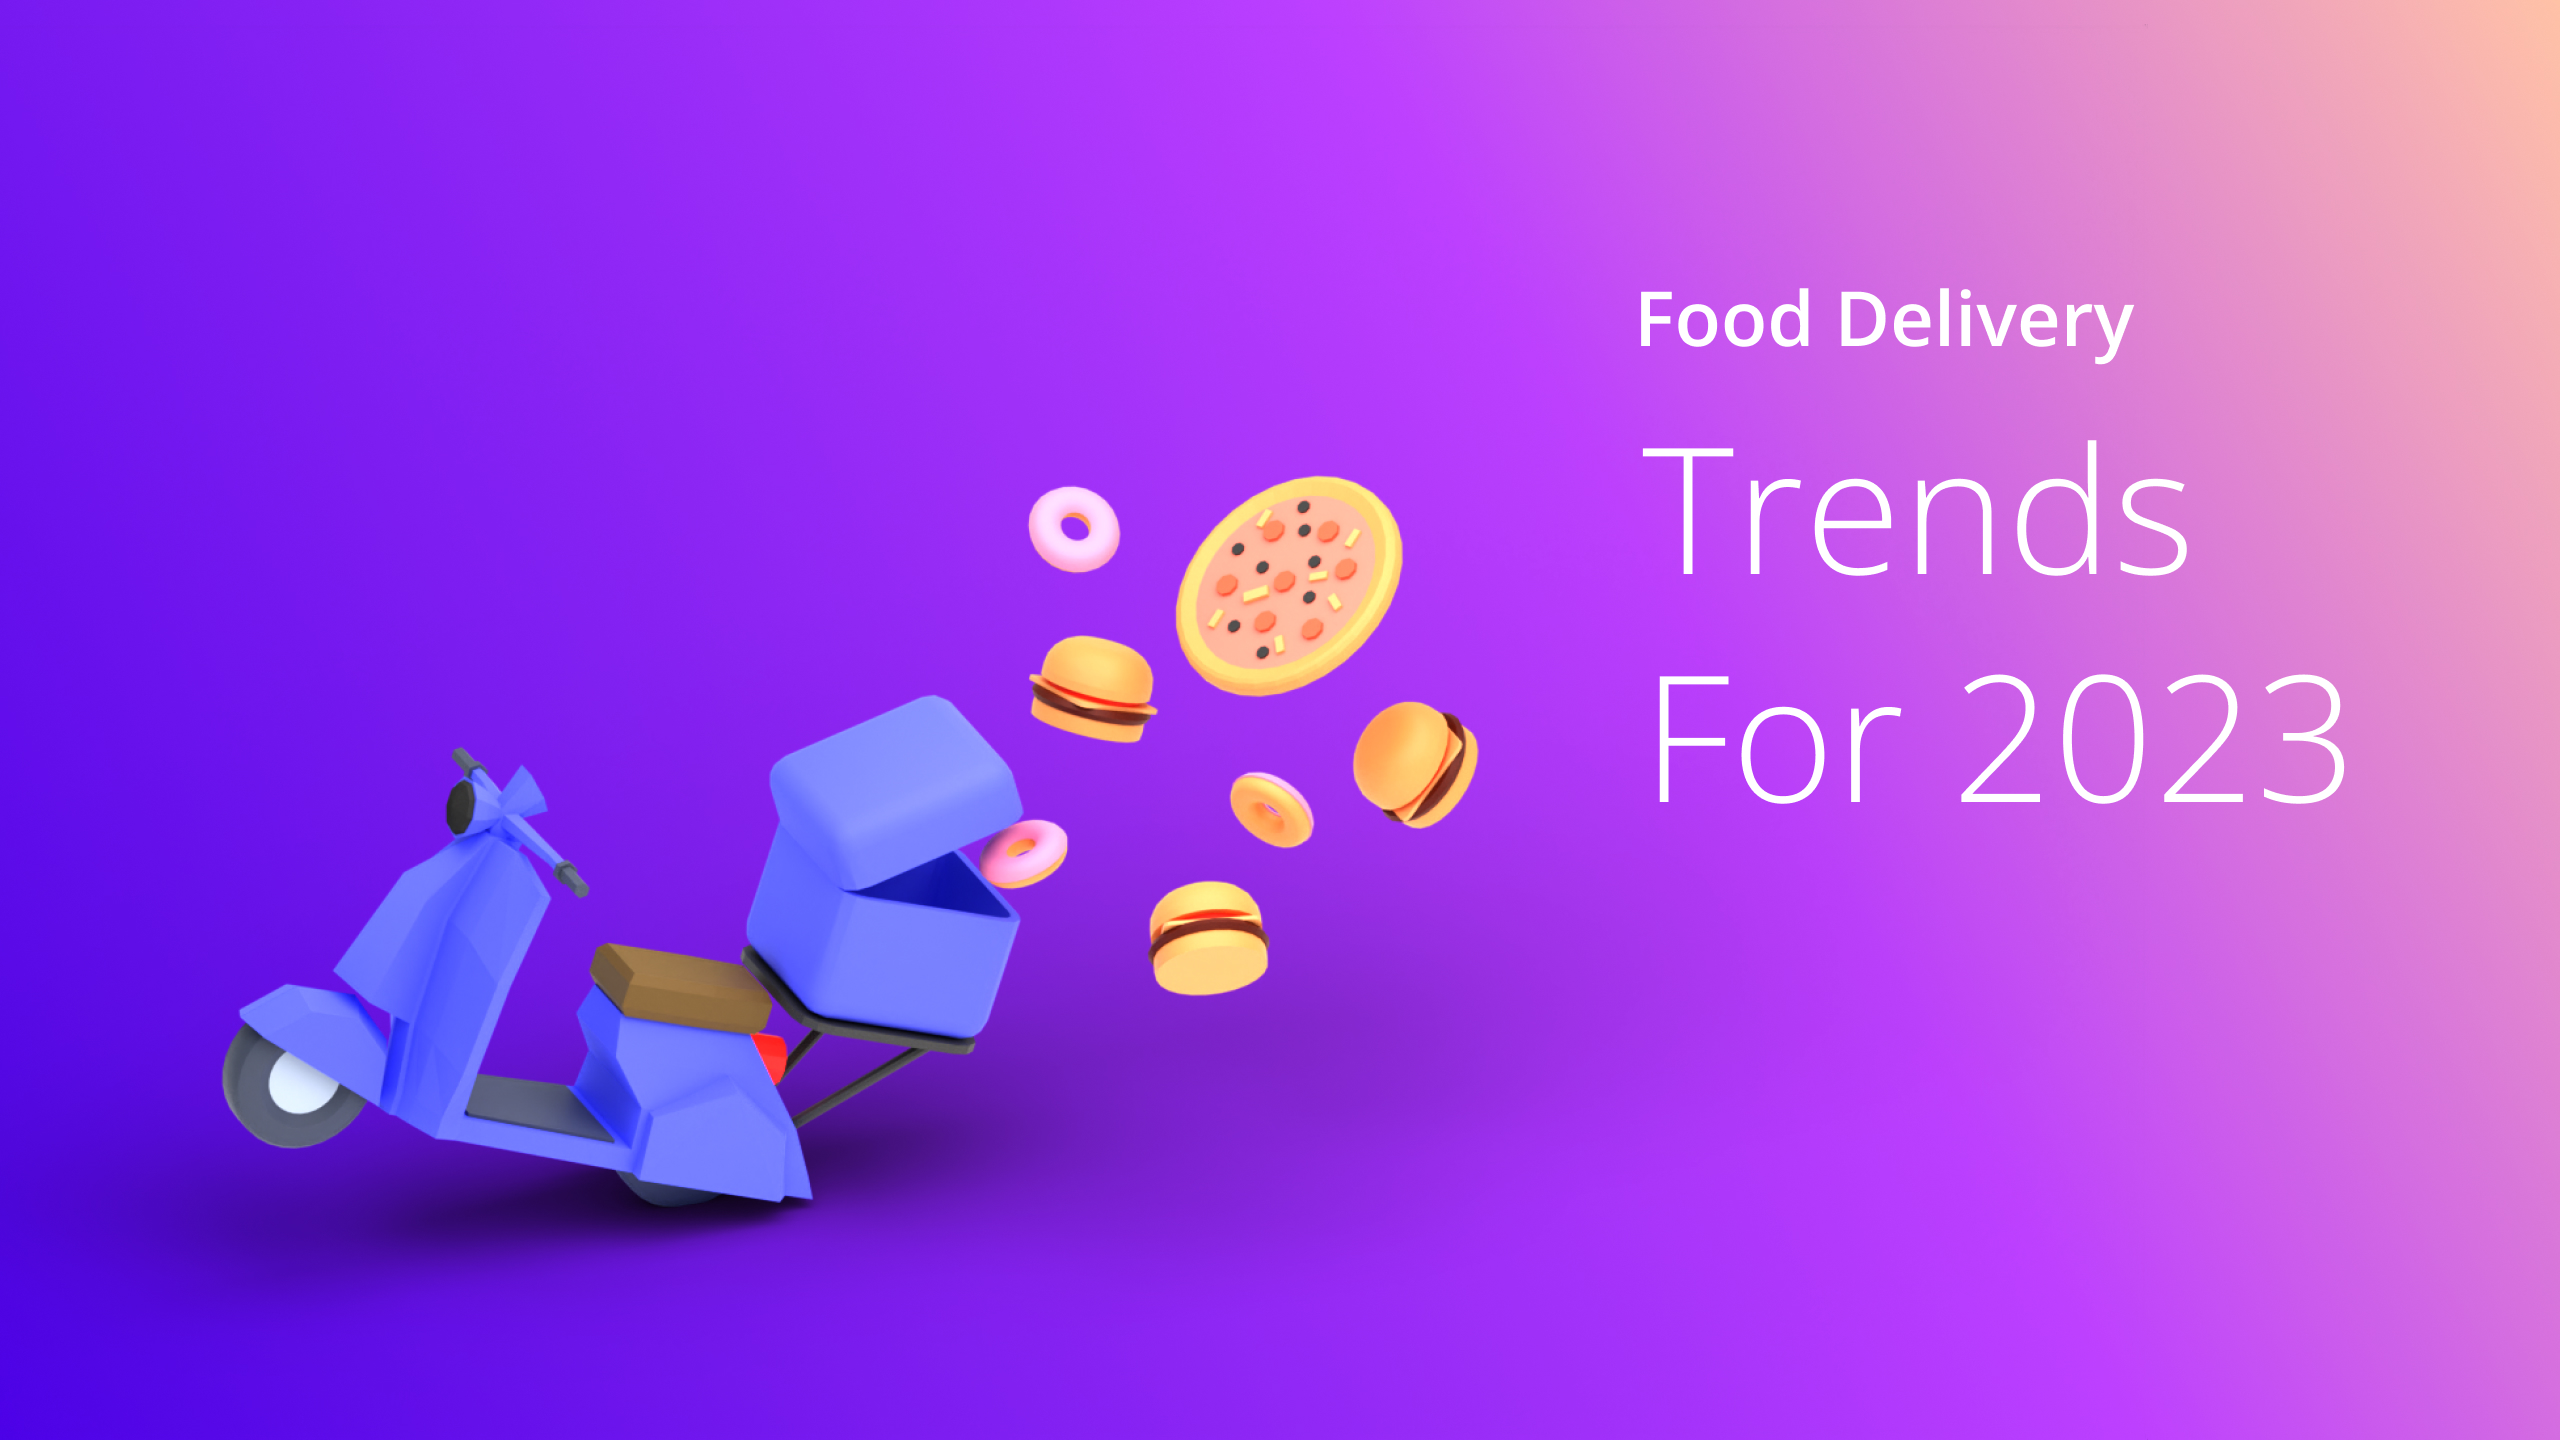 Custom Image - Food Delivery Trends for 2023